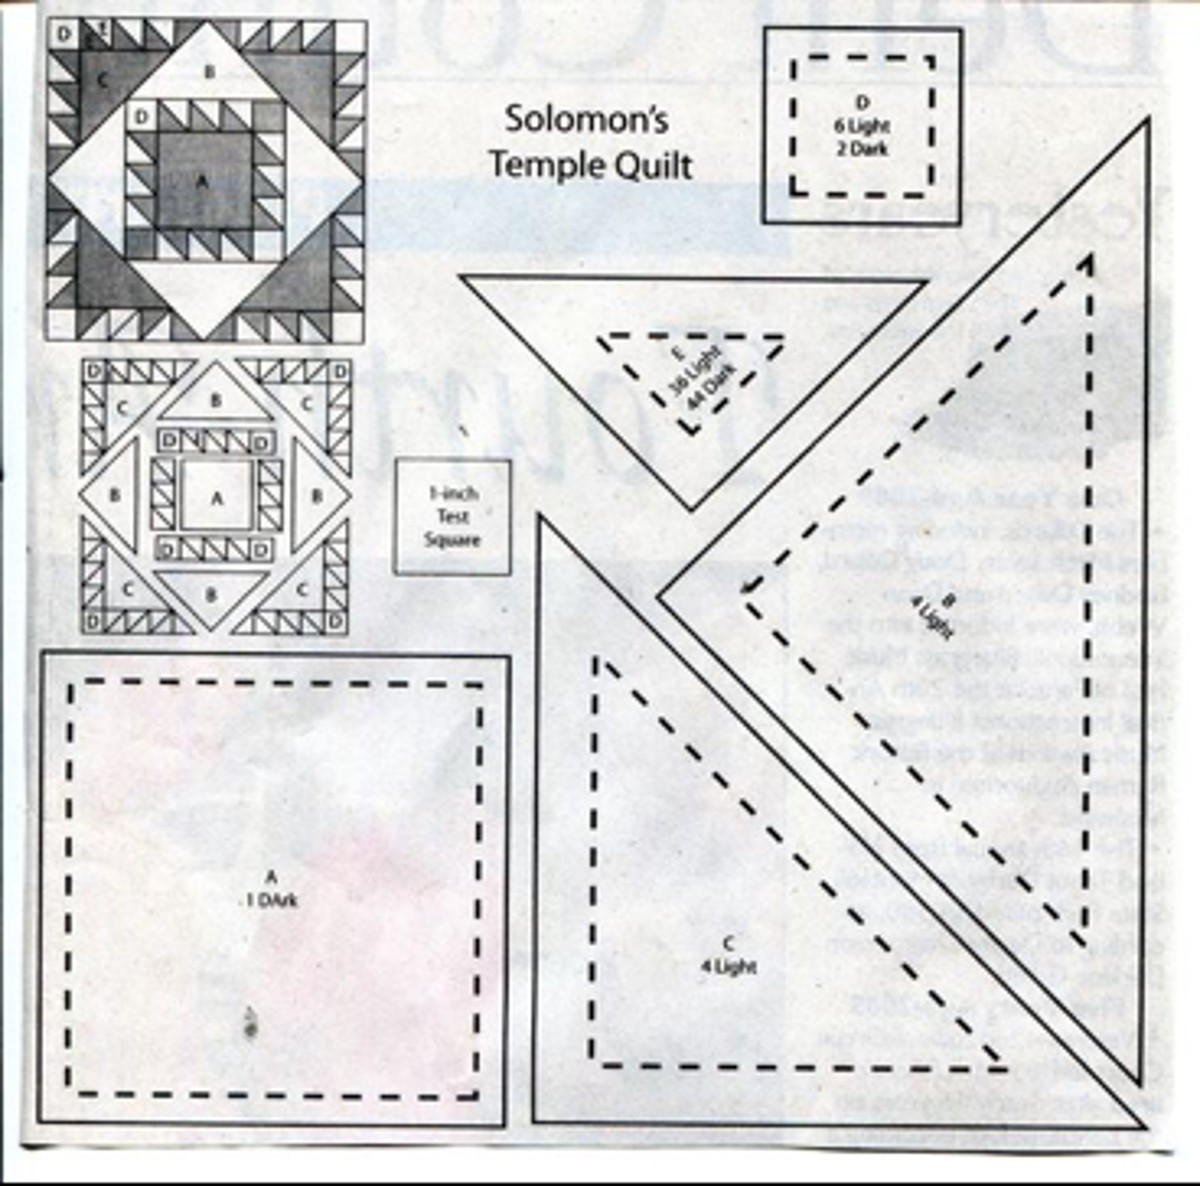 The pattern for Solomon's Temple